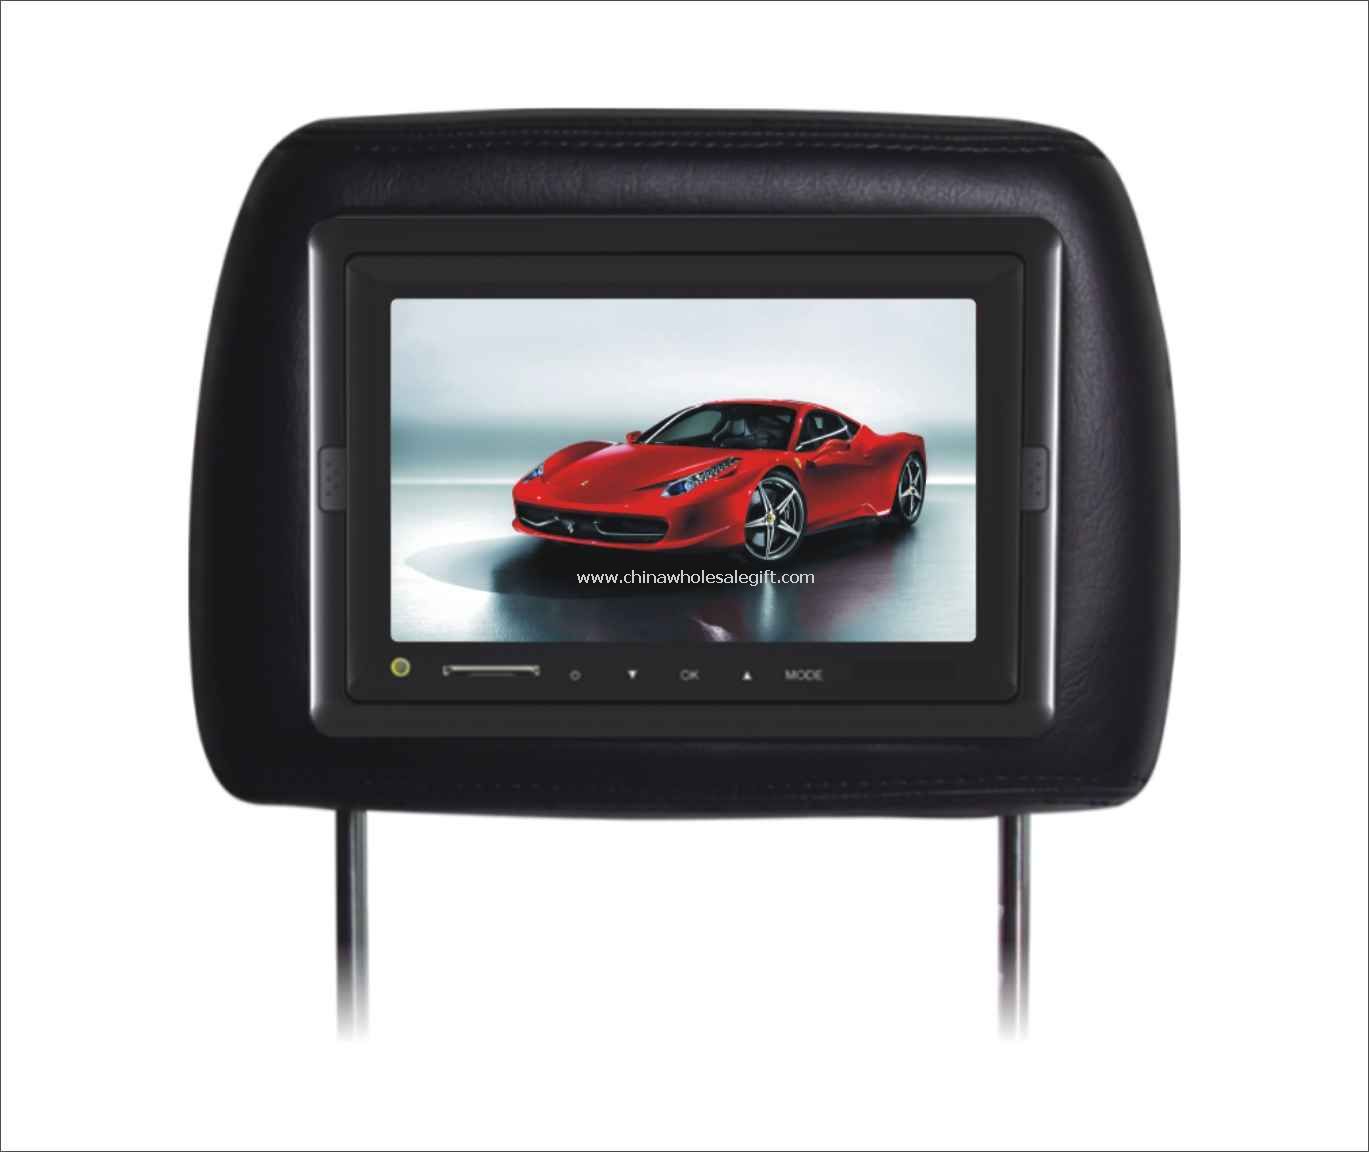 7 inch Digital panel Headrest Monitor with USB function